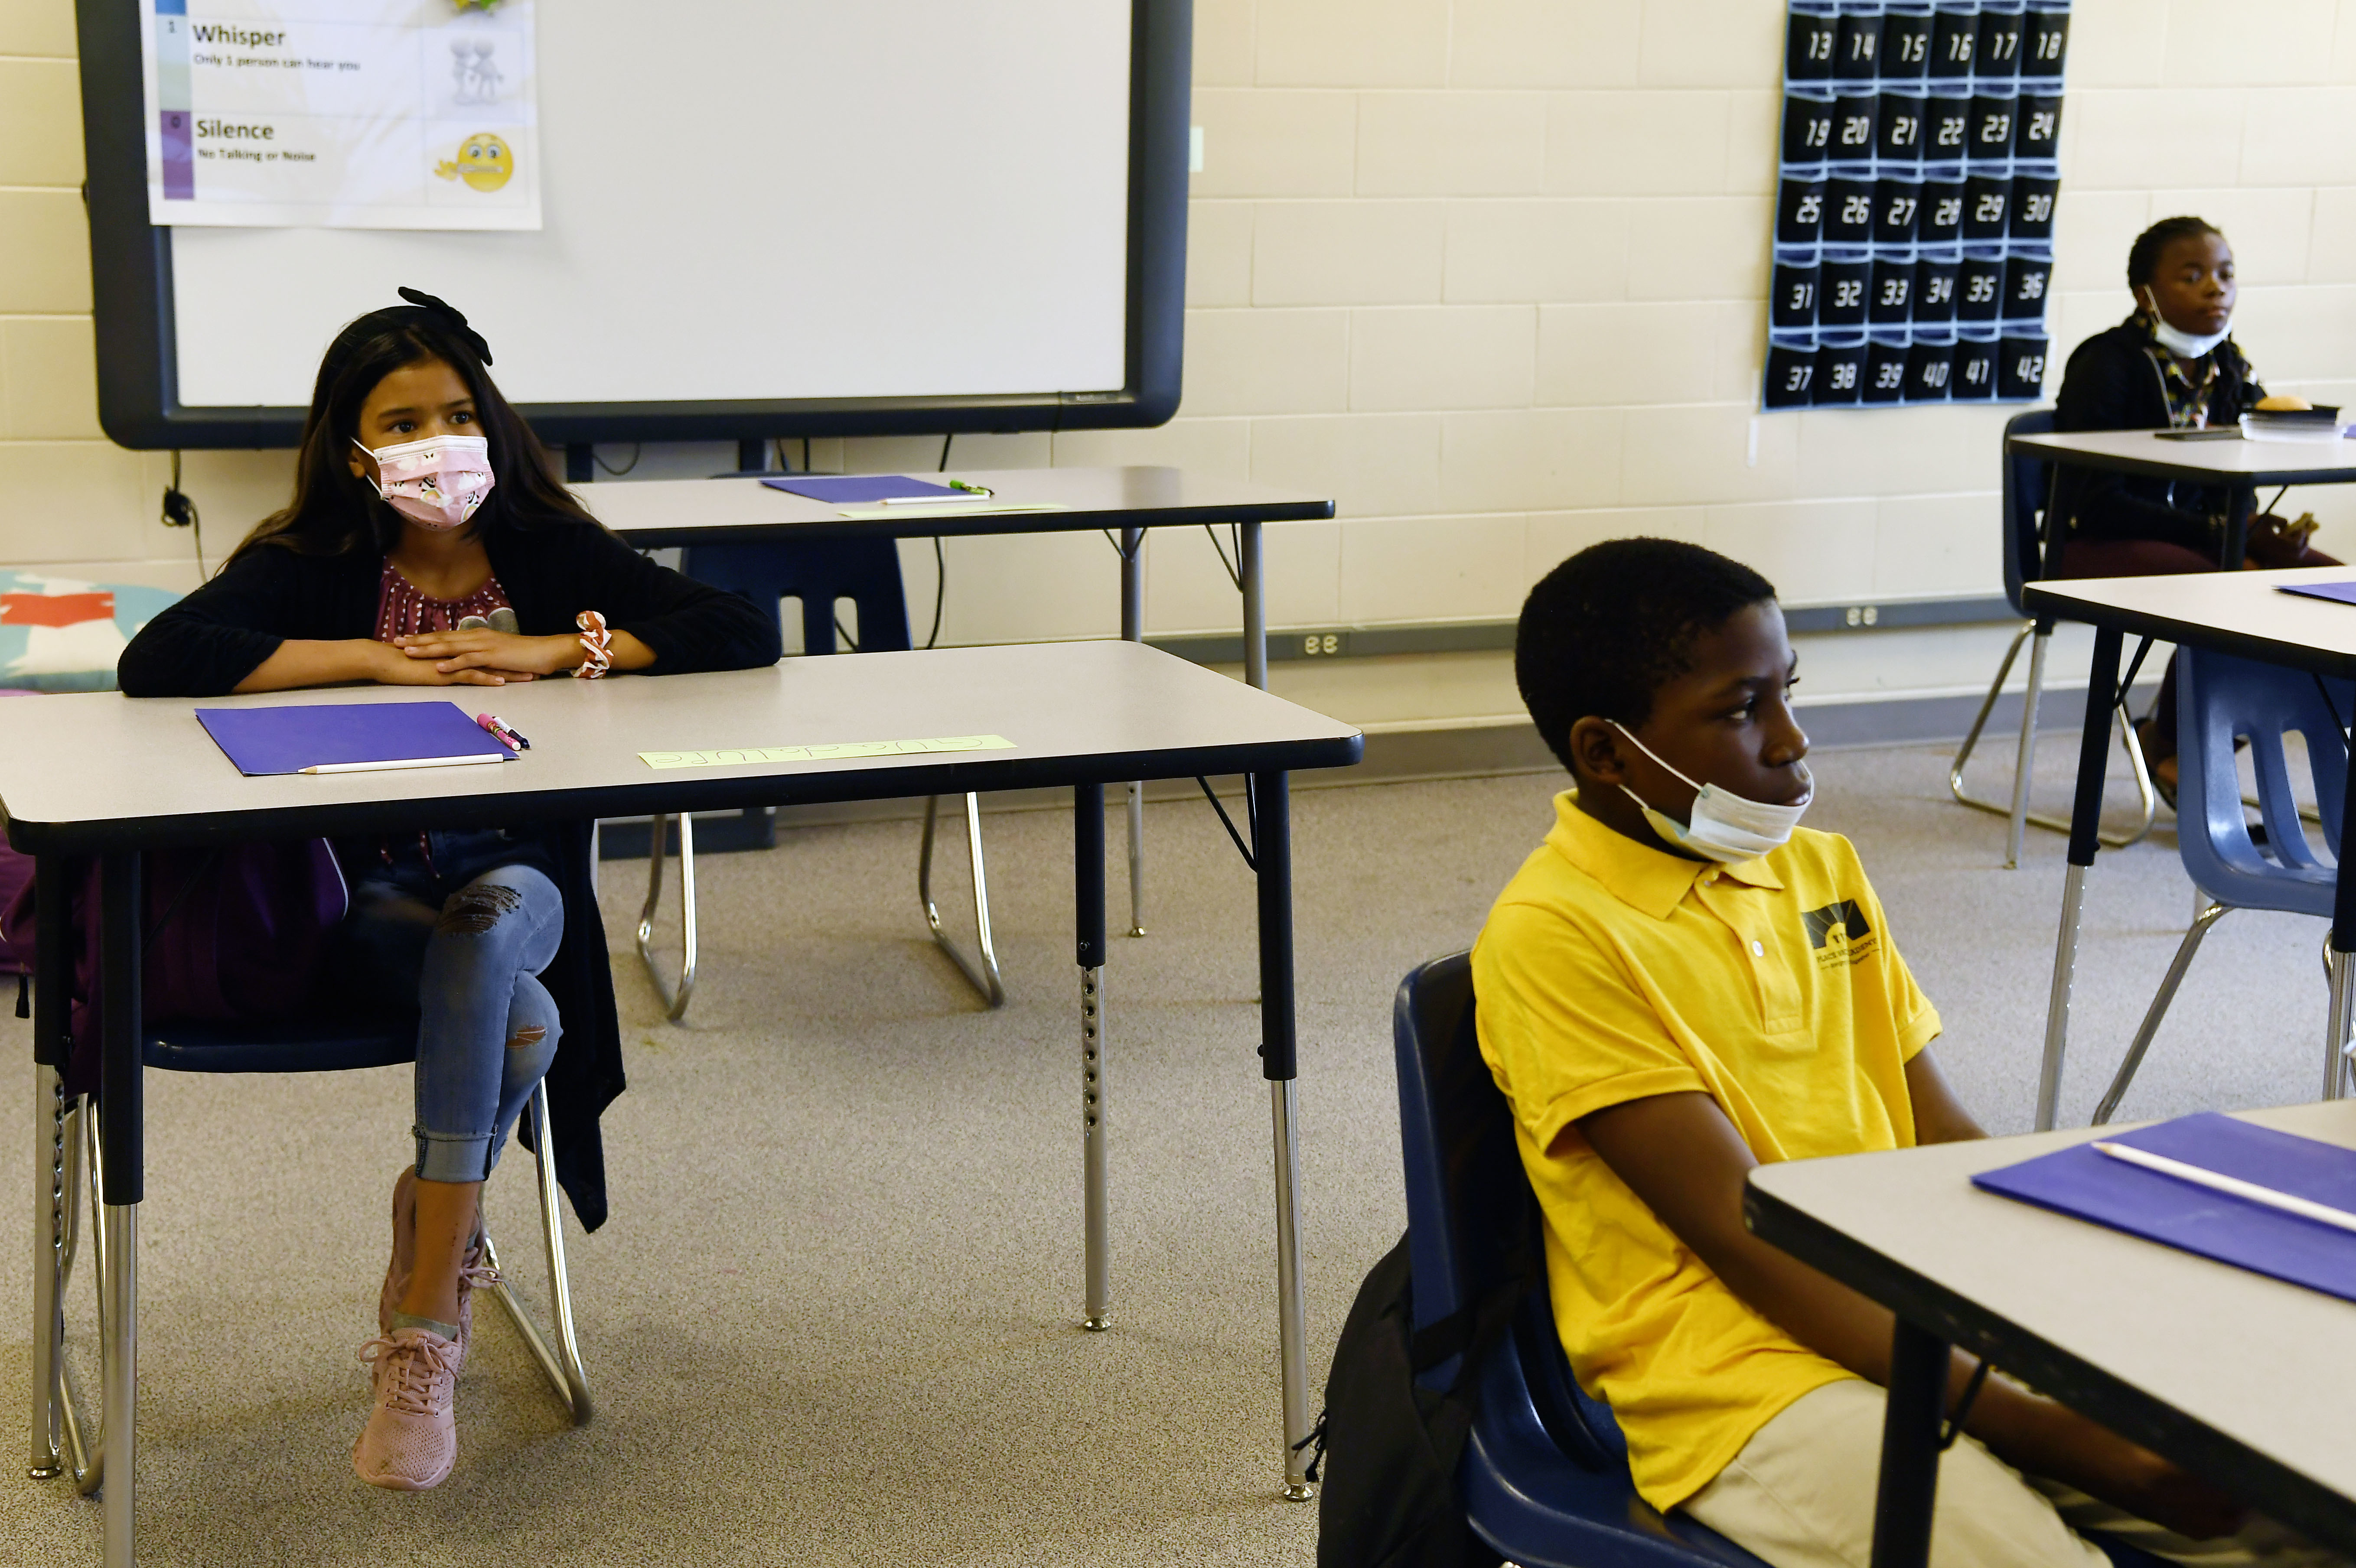 Three middle school students with masks sit at spaced out desks in a classroom, with a white board behind them.